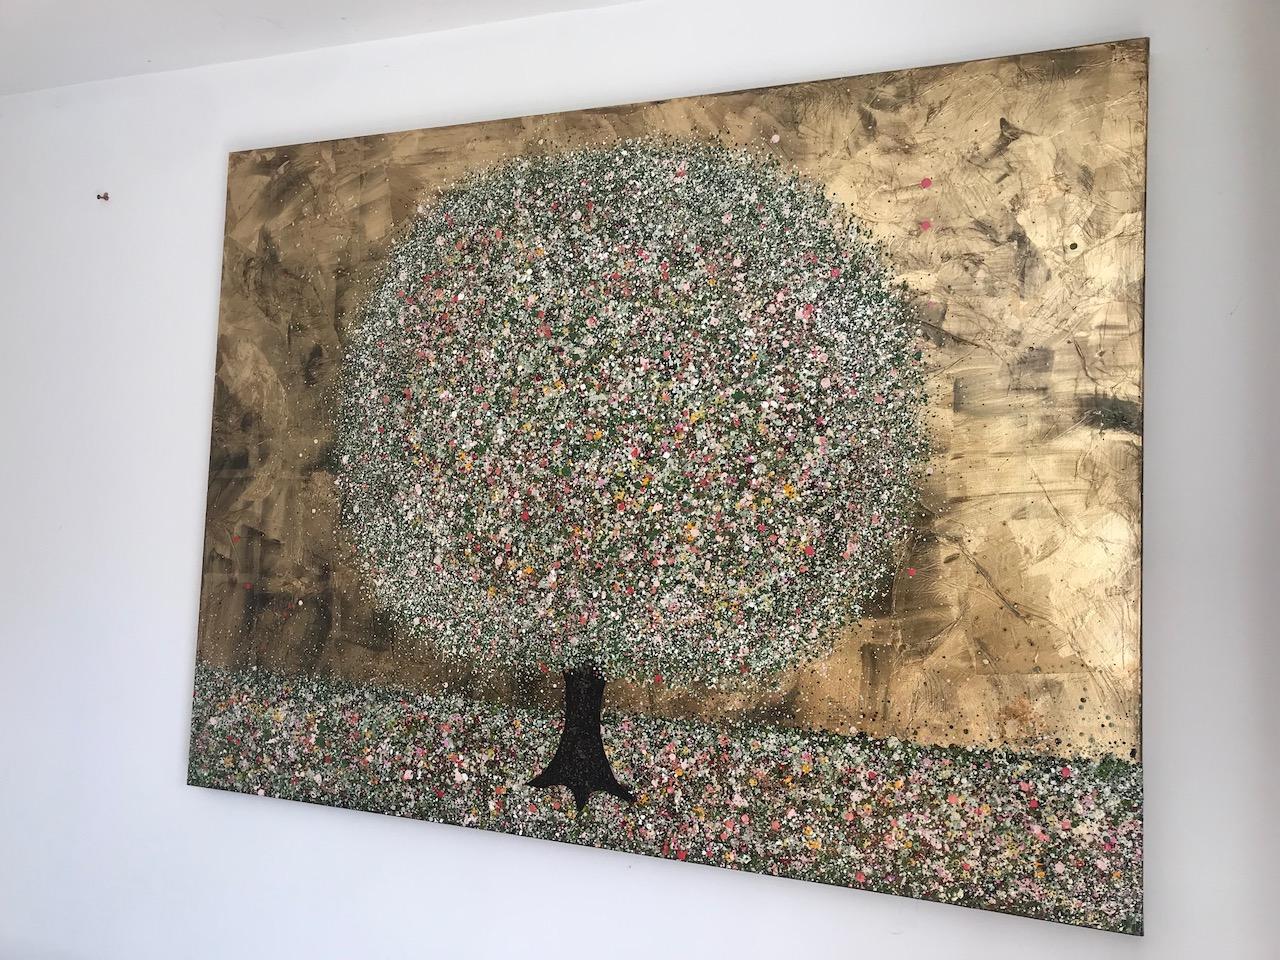 Nicky Chubb
Summer Days
Original Landscape Painting
Acrylic Paint, Gold Metal Leaf and Glitter on Canvas
Canvas Size: H 90cm x W 120cm x D 4cm
Sold Unframed
Ready to Hang
Please note that in situ images are purely an indication of how a piece may